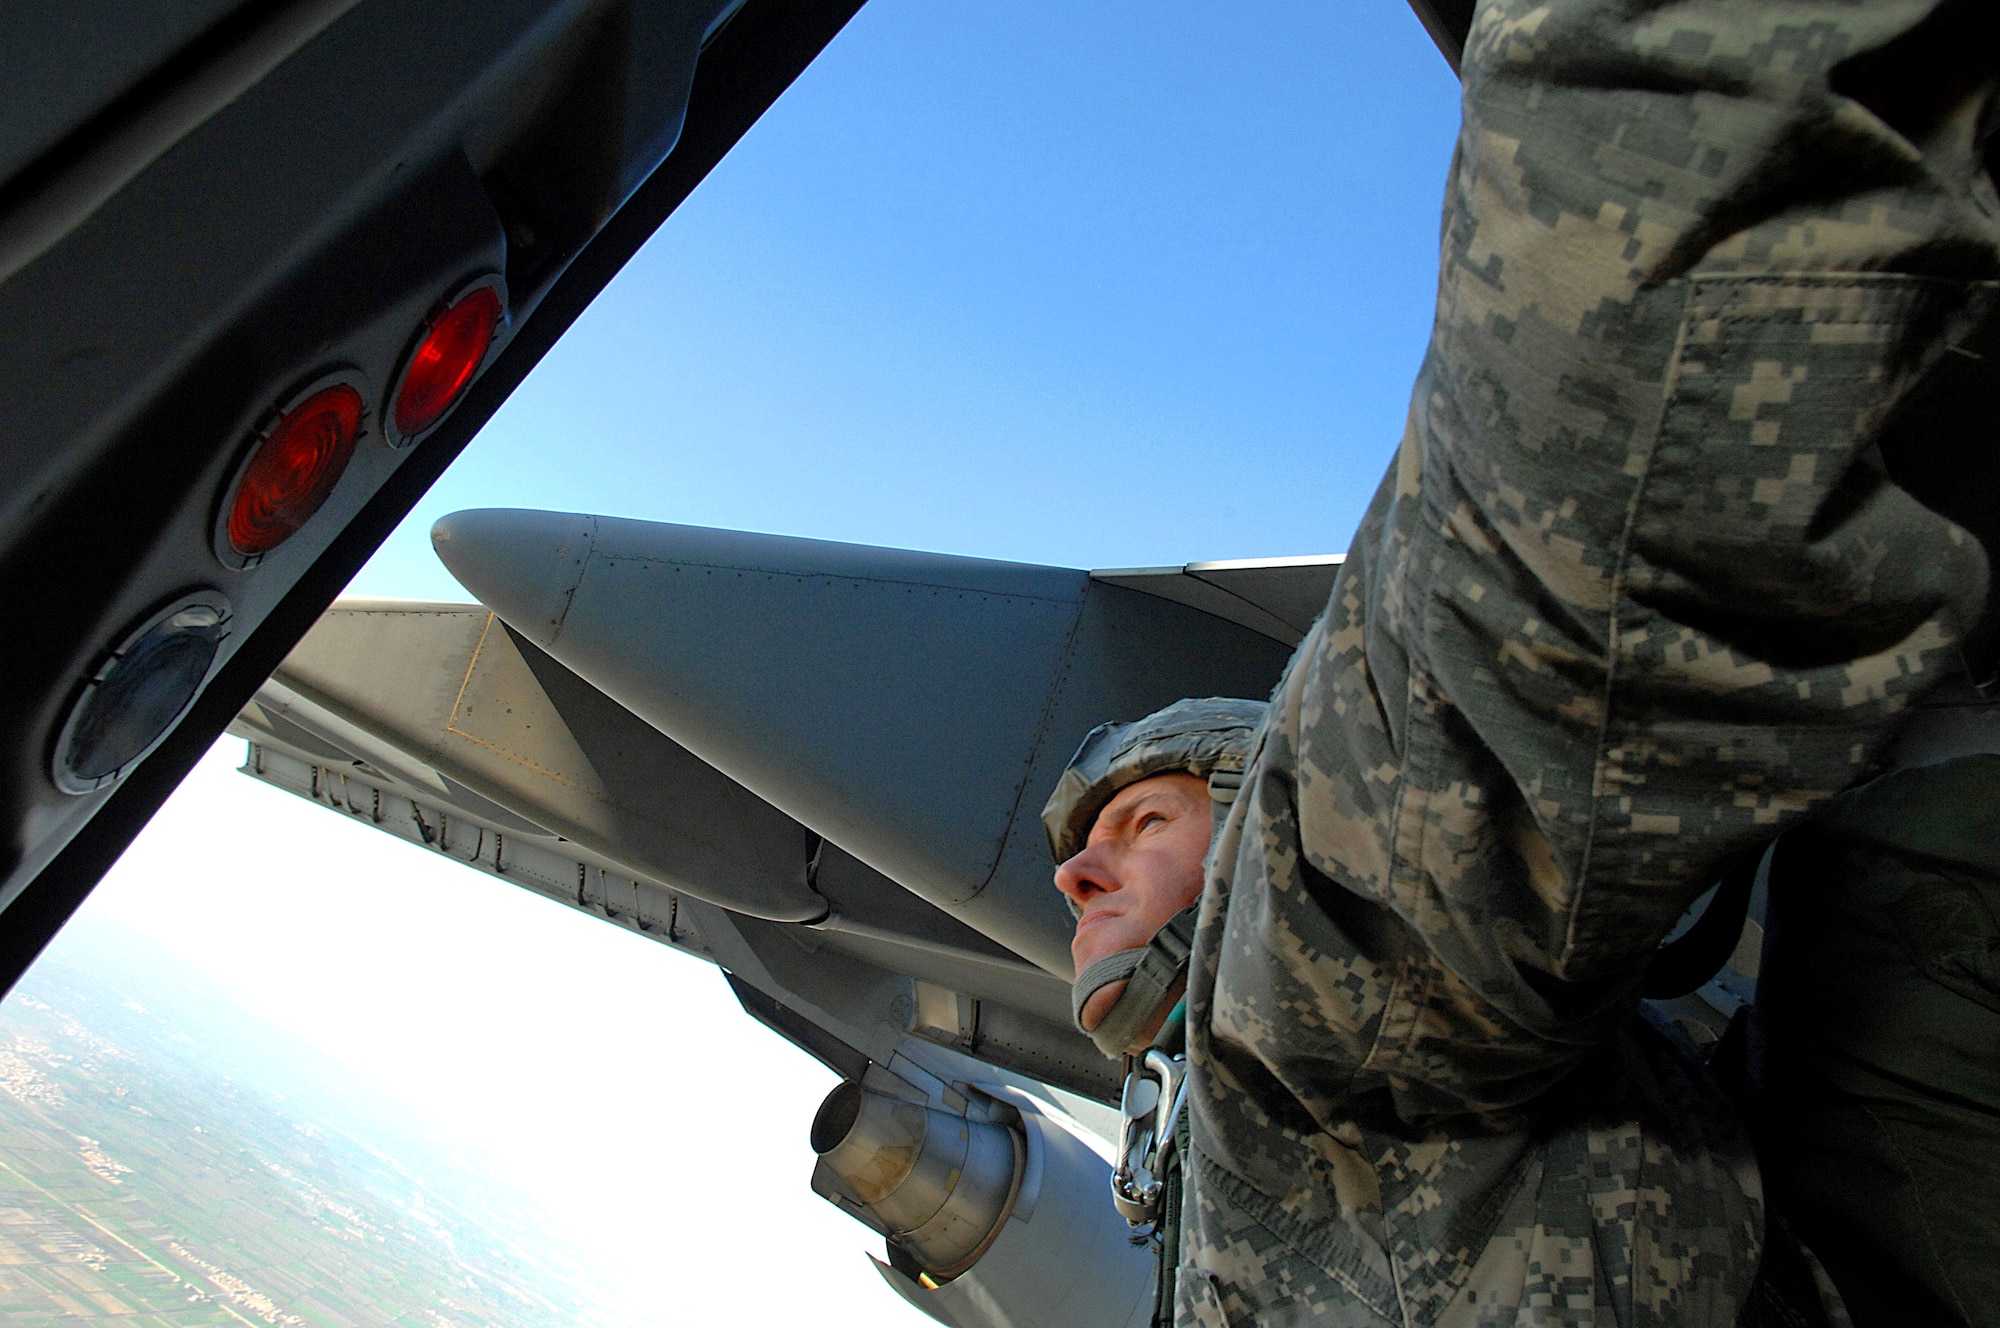 An Army paratrooper from the 20th Engineering Brigade, 101st Airborne Division, Fort Campbell, Ky., prepares to parachute from a  C-17 Globemaster III into Cairo, Egypt, Nov. 7 as part of Exercise Bright Star 2007. The C-17s are from Charleston Air Force Base, S.C. (U.S Air Force photo/Staff Sgt. Aaron Allmon) 